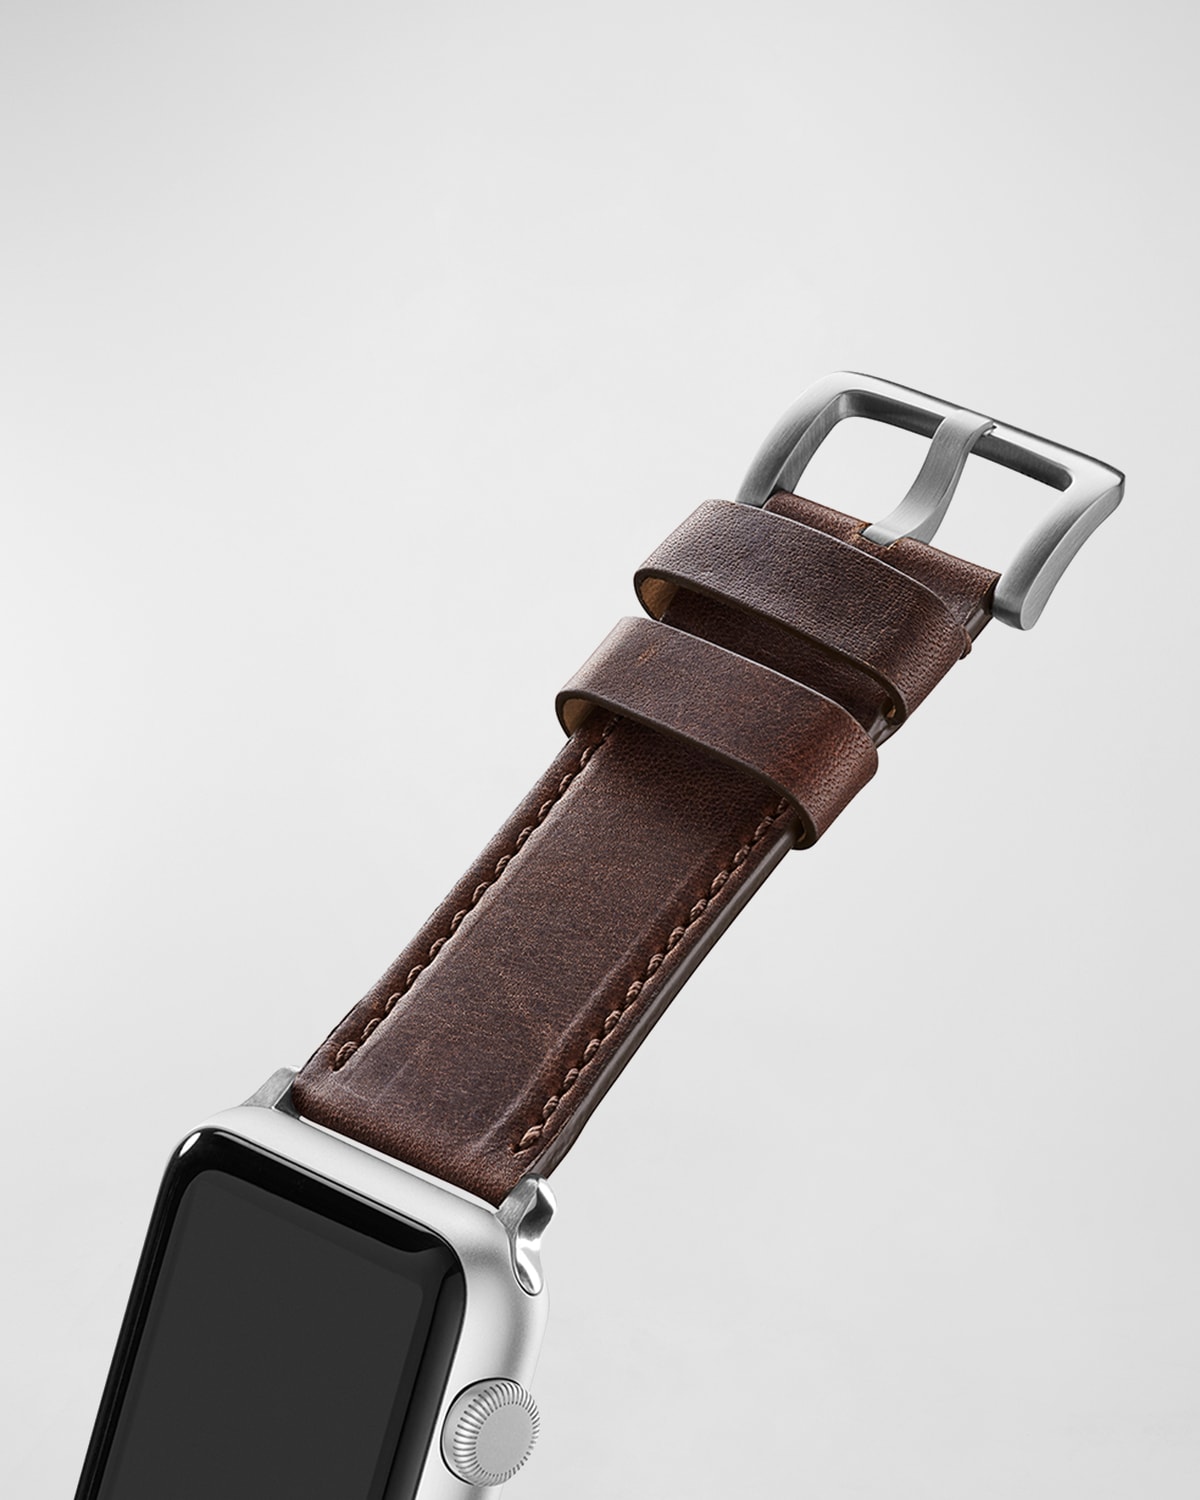 SHINOLA MEN'S 24MM GRIZZLY LEATHER STRAP FOR APPLE WATCH,PROD243520020